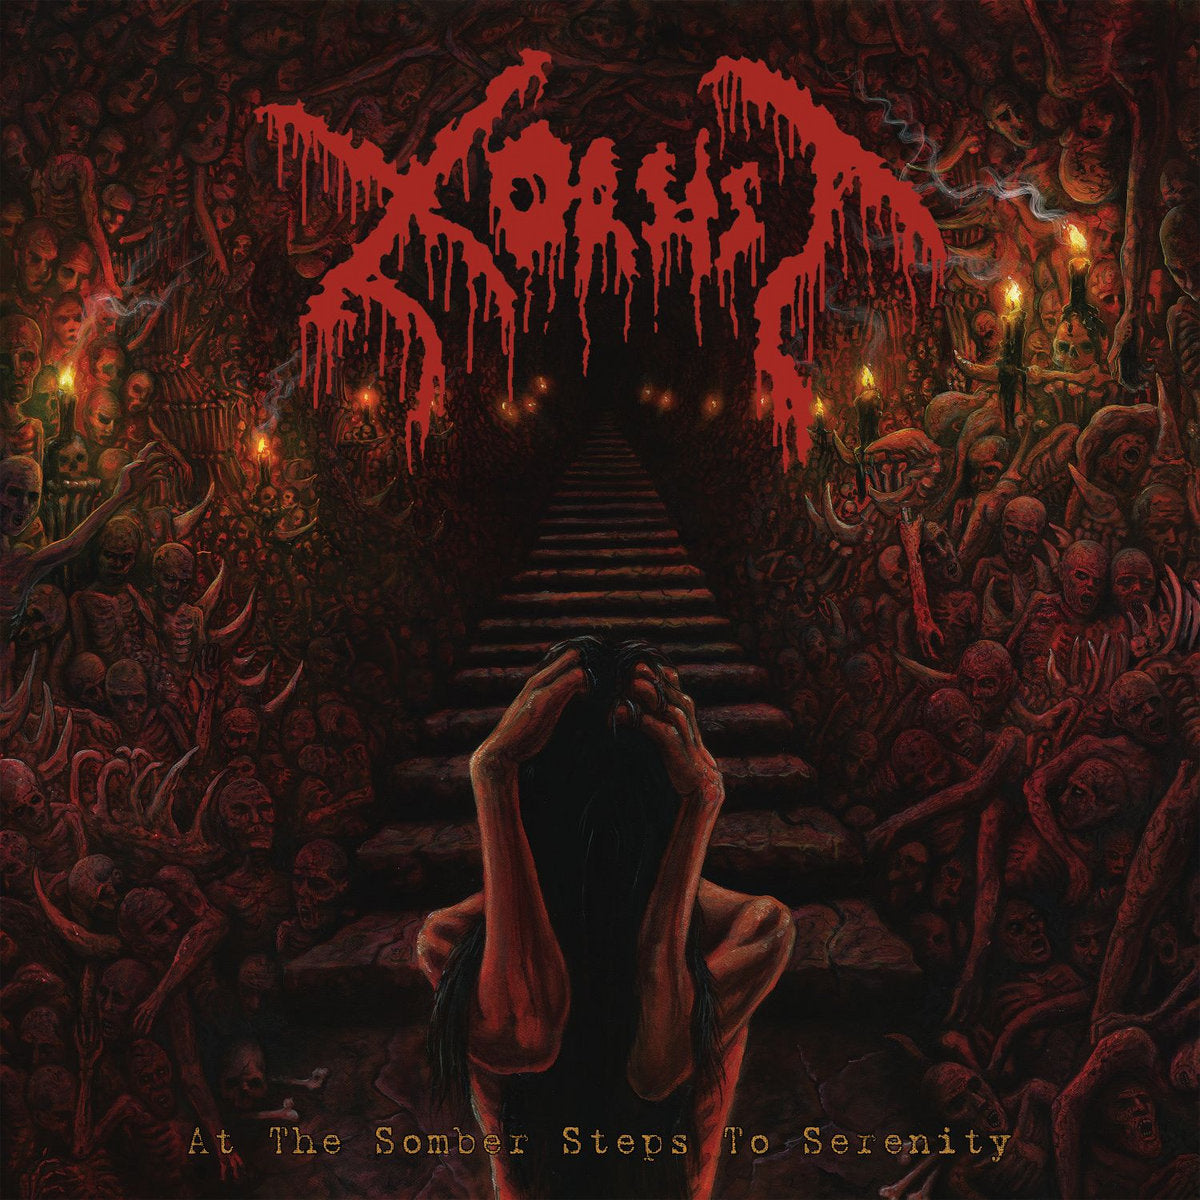 XORSIST "At The Somber Steps To Serenity" LP